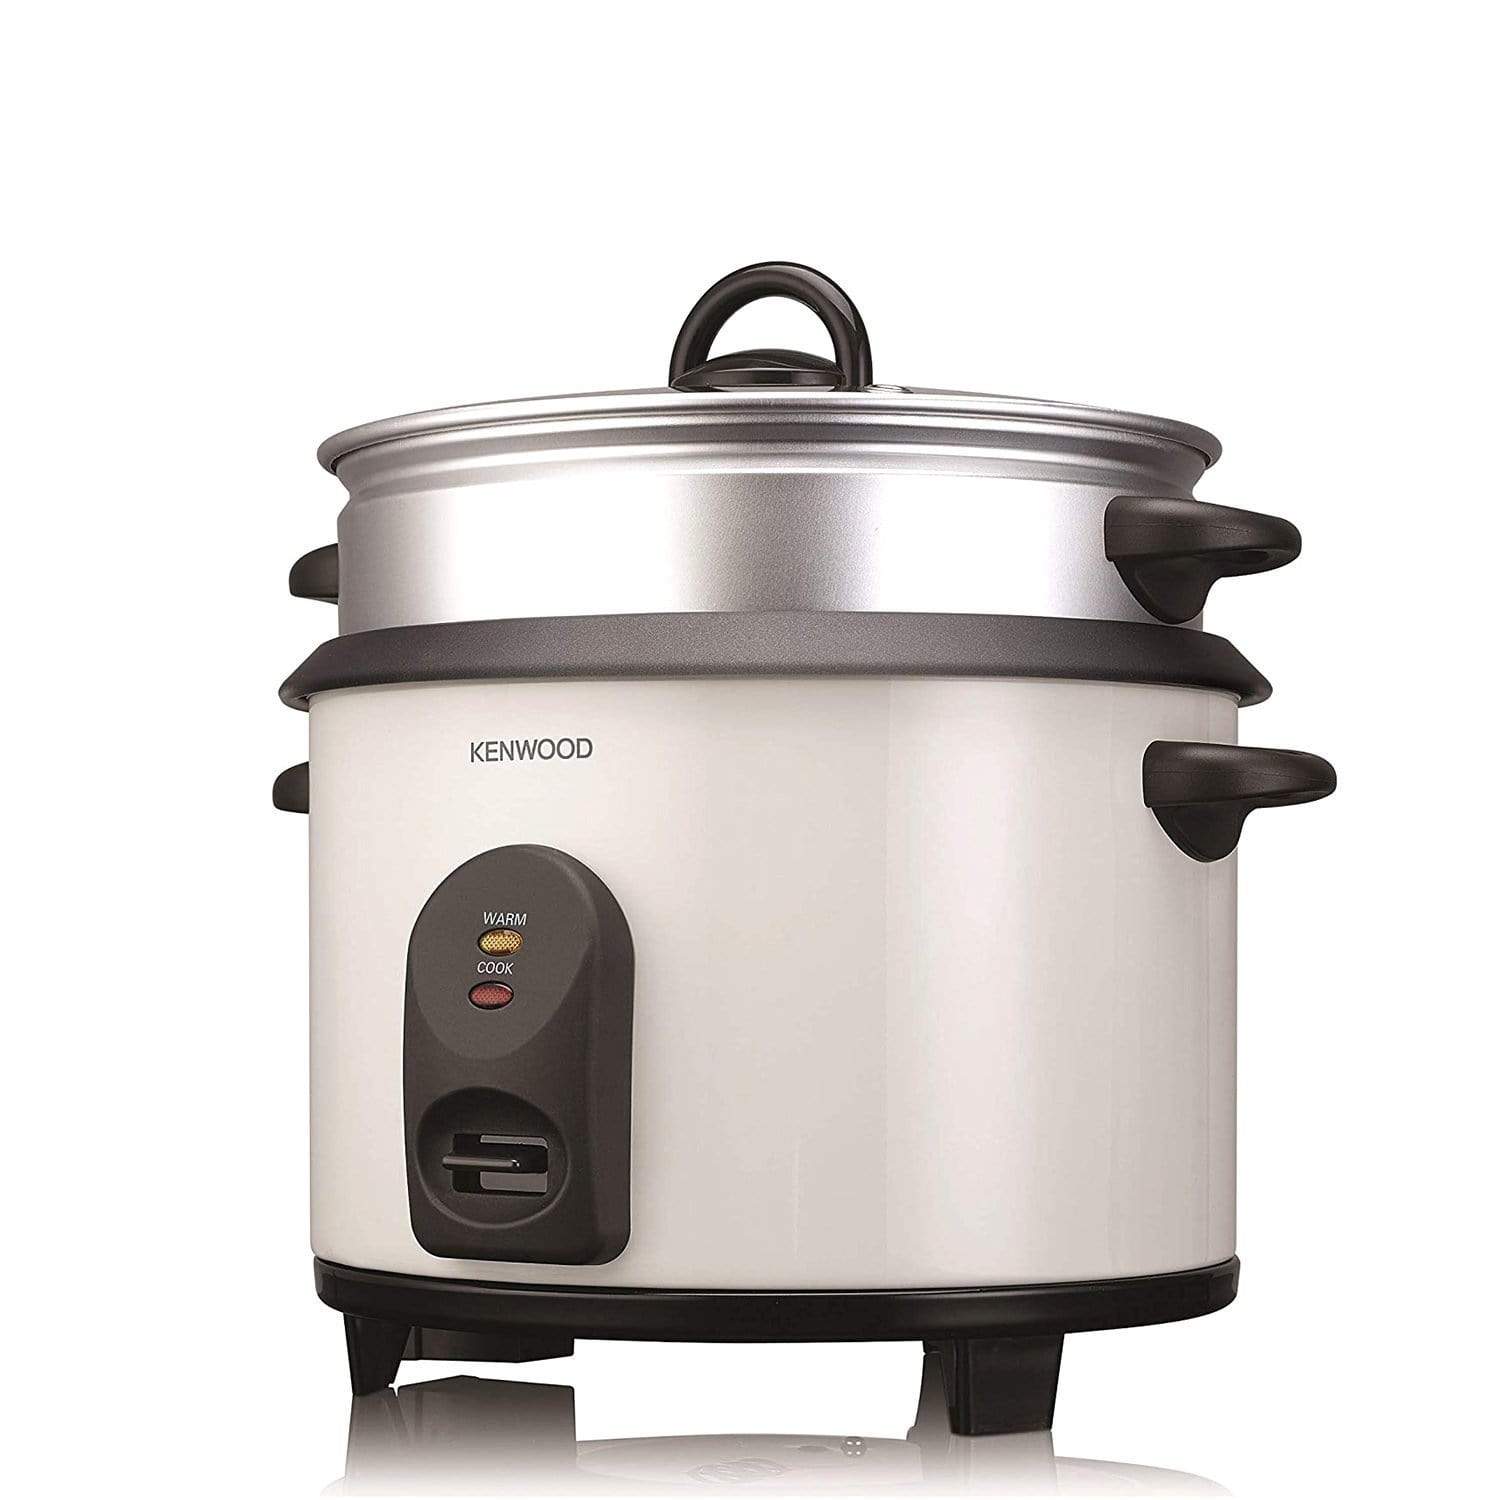 Kenwood 2.8 Litre Rice Cooker with Steam Basket - RCM680 - Jashanmal Home